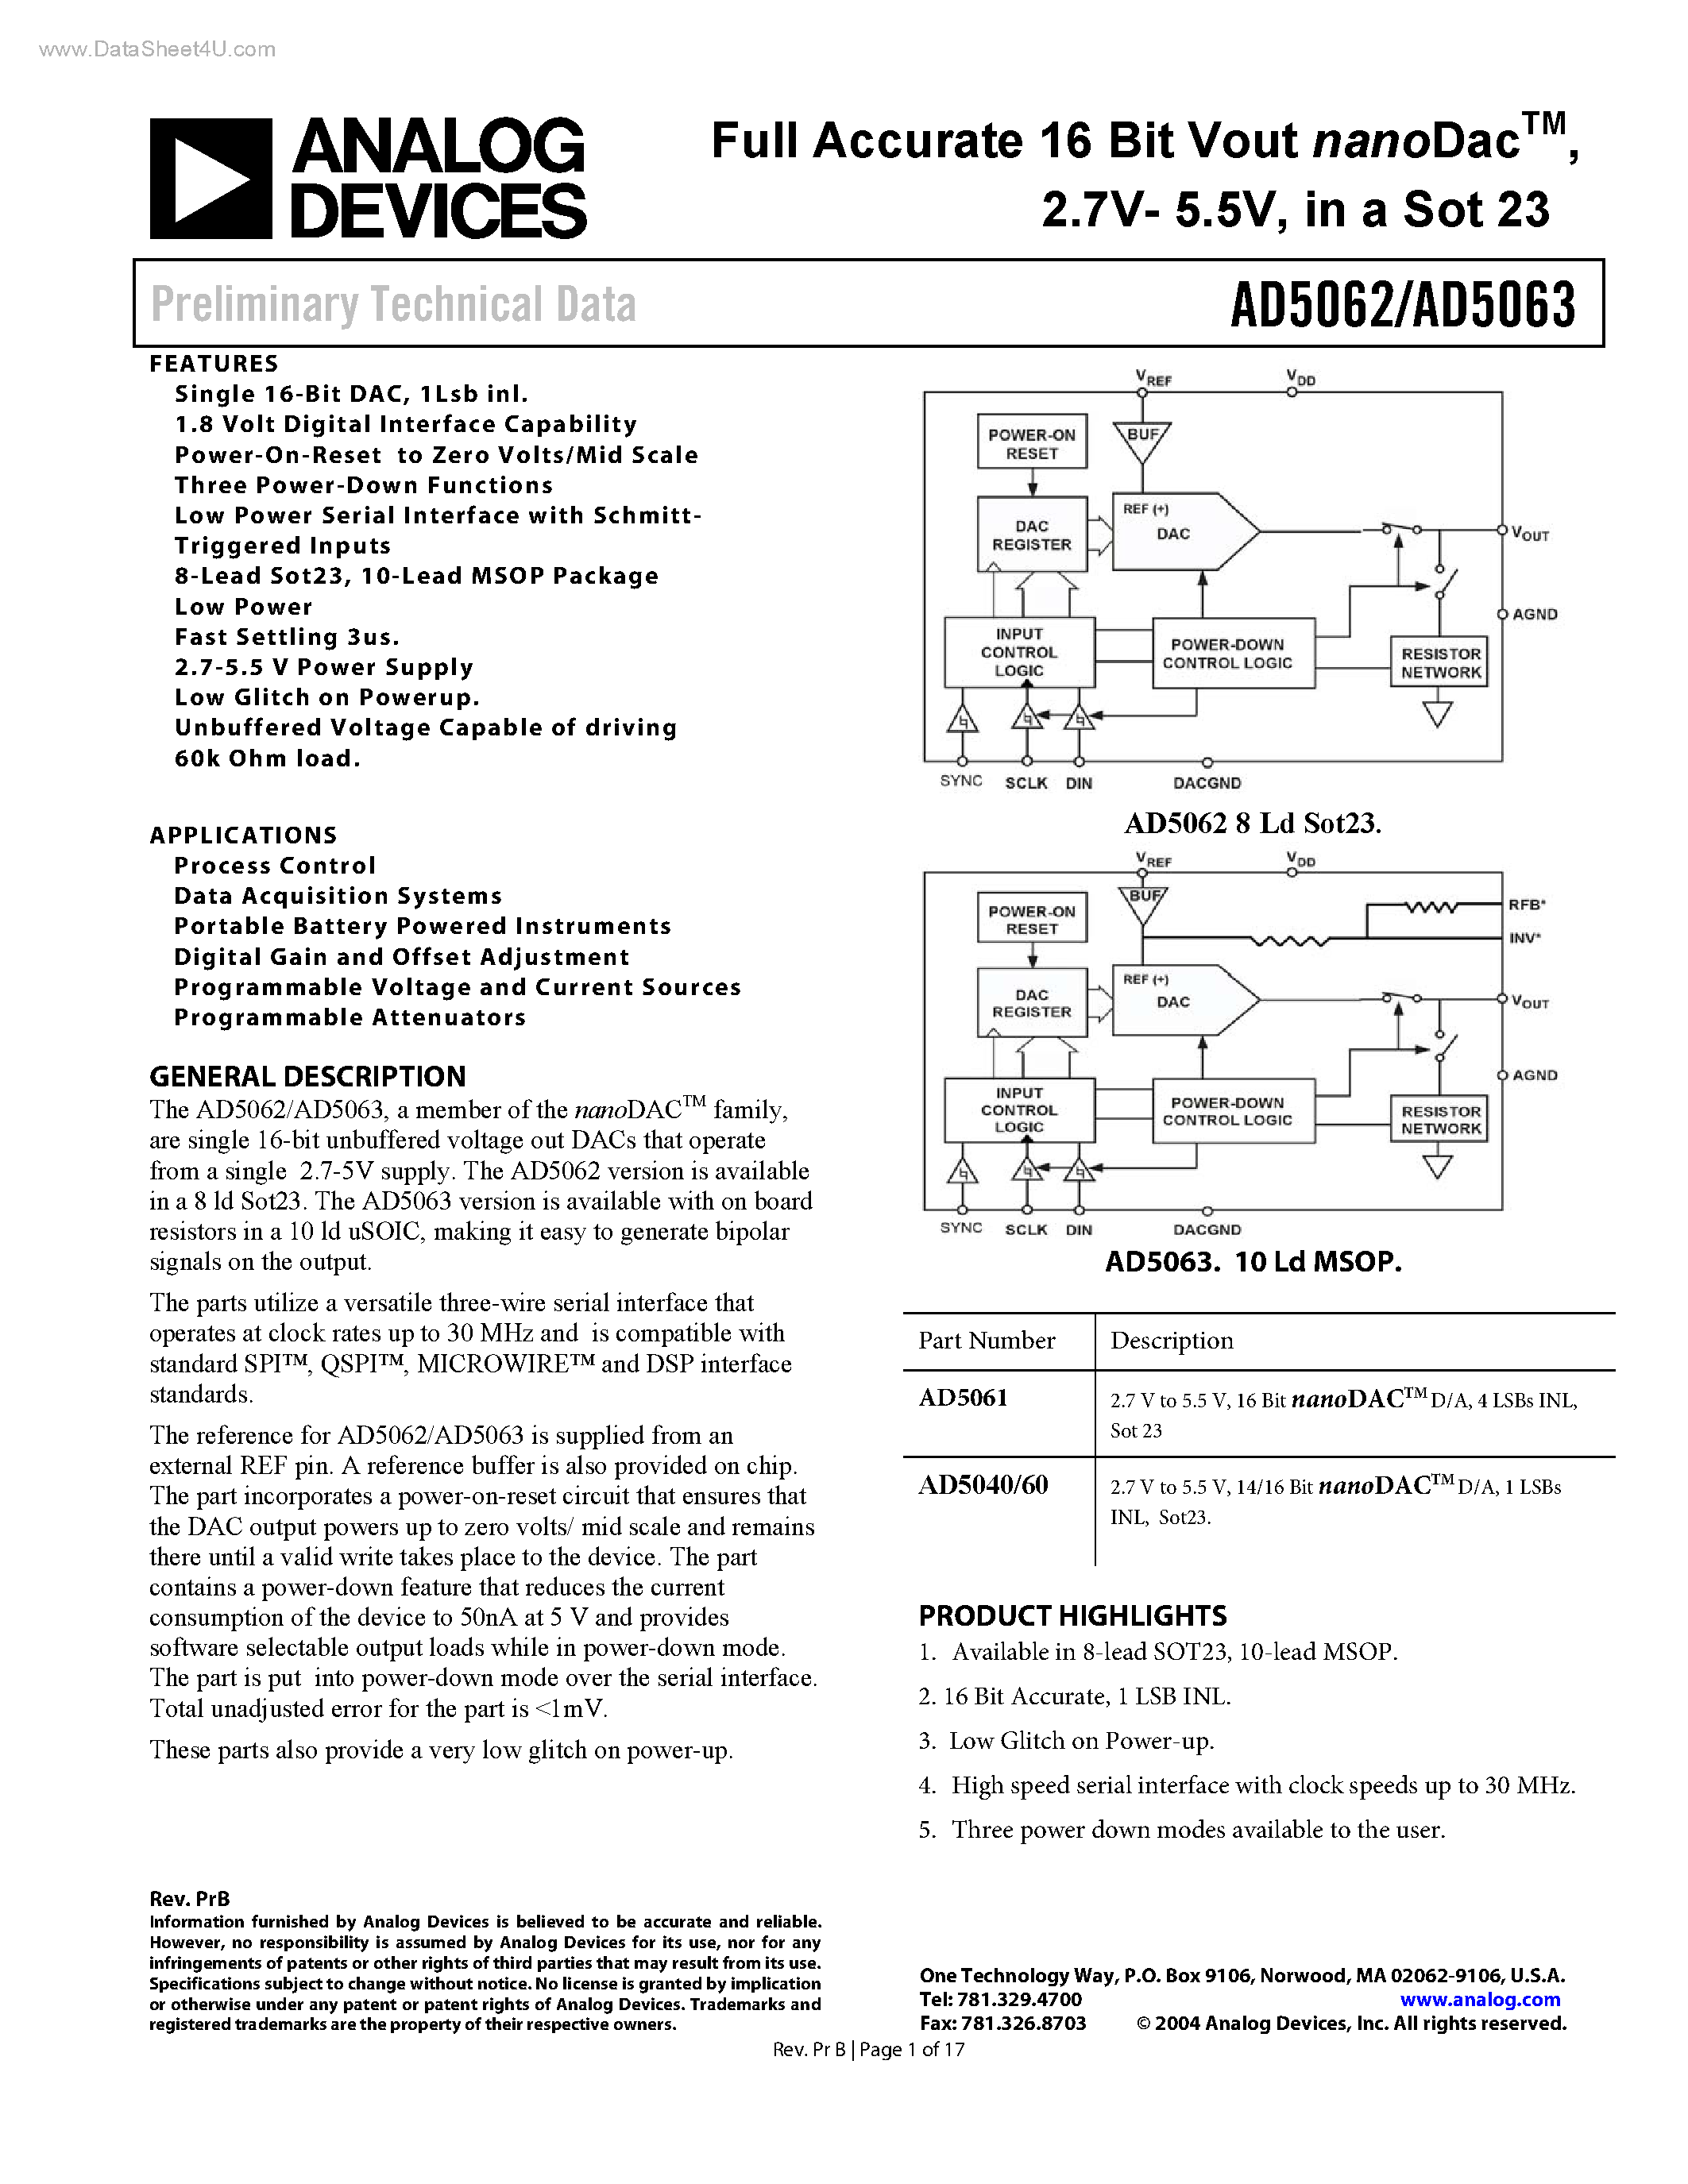 Datasheet AD5062 - (AD5062 / AD5063) Full Accurate 16 Bit Vout nanoDac page 1